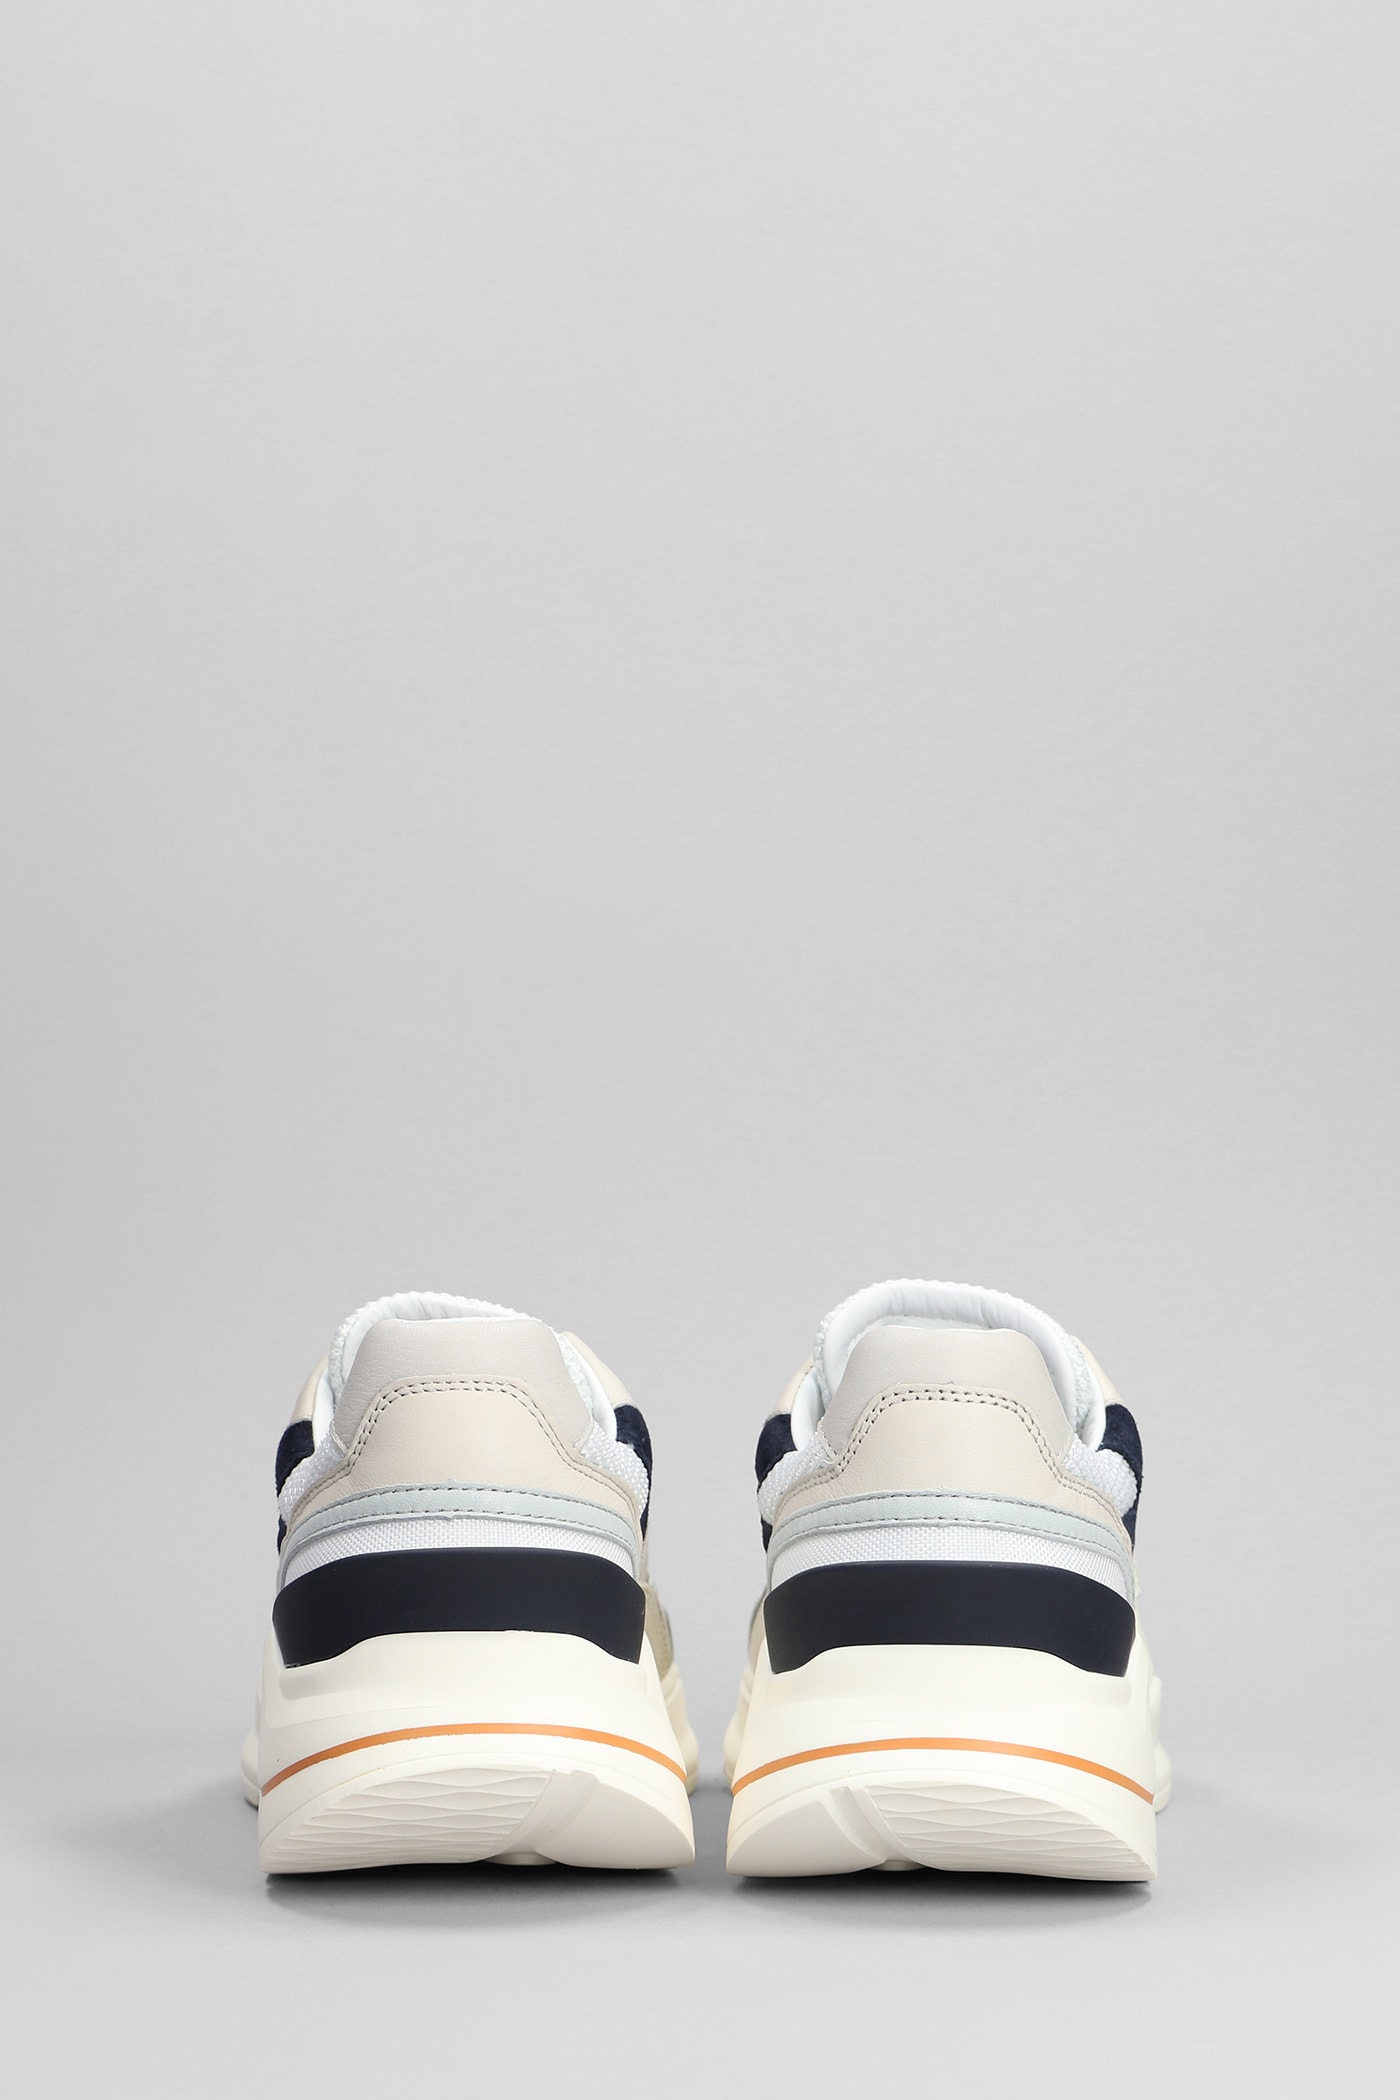 Shop Date Fuga Sneakers In White Leather And Fabric